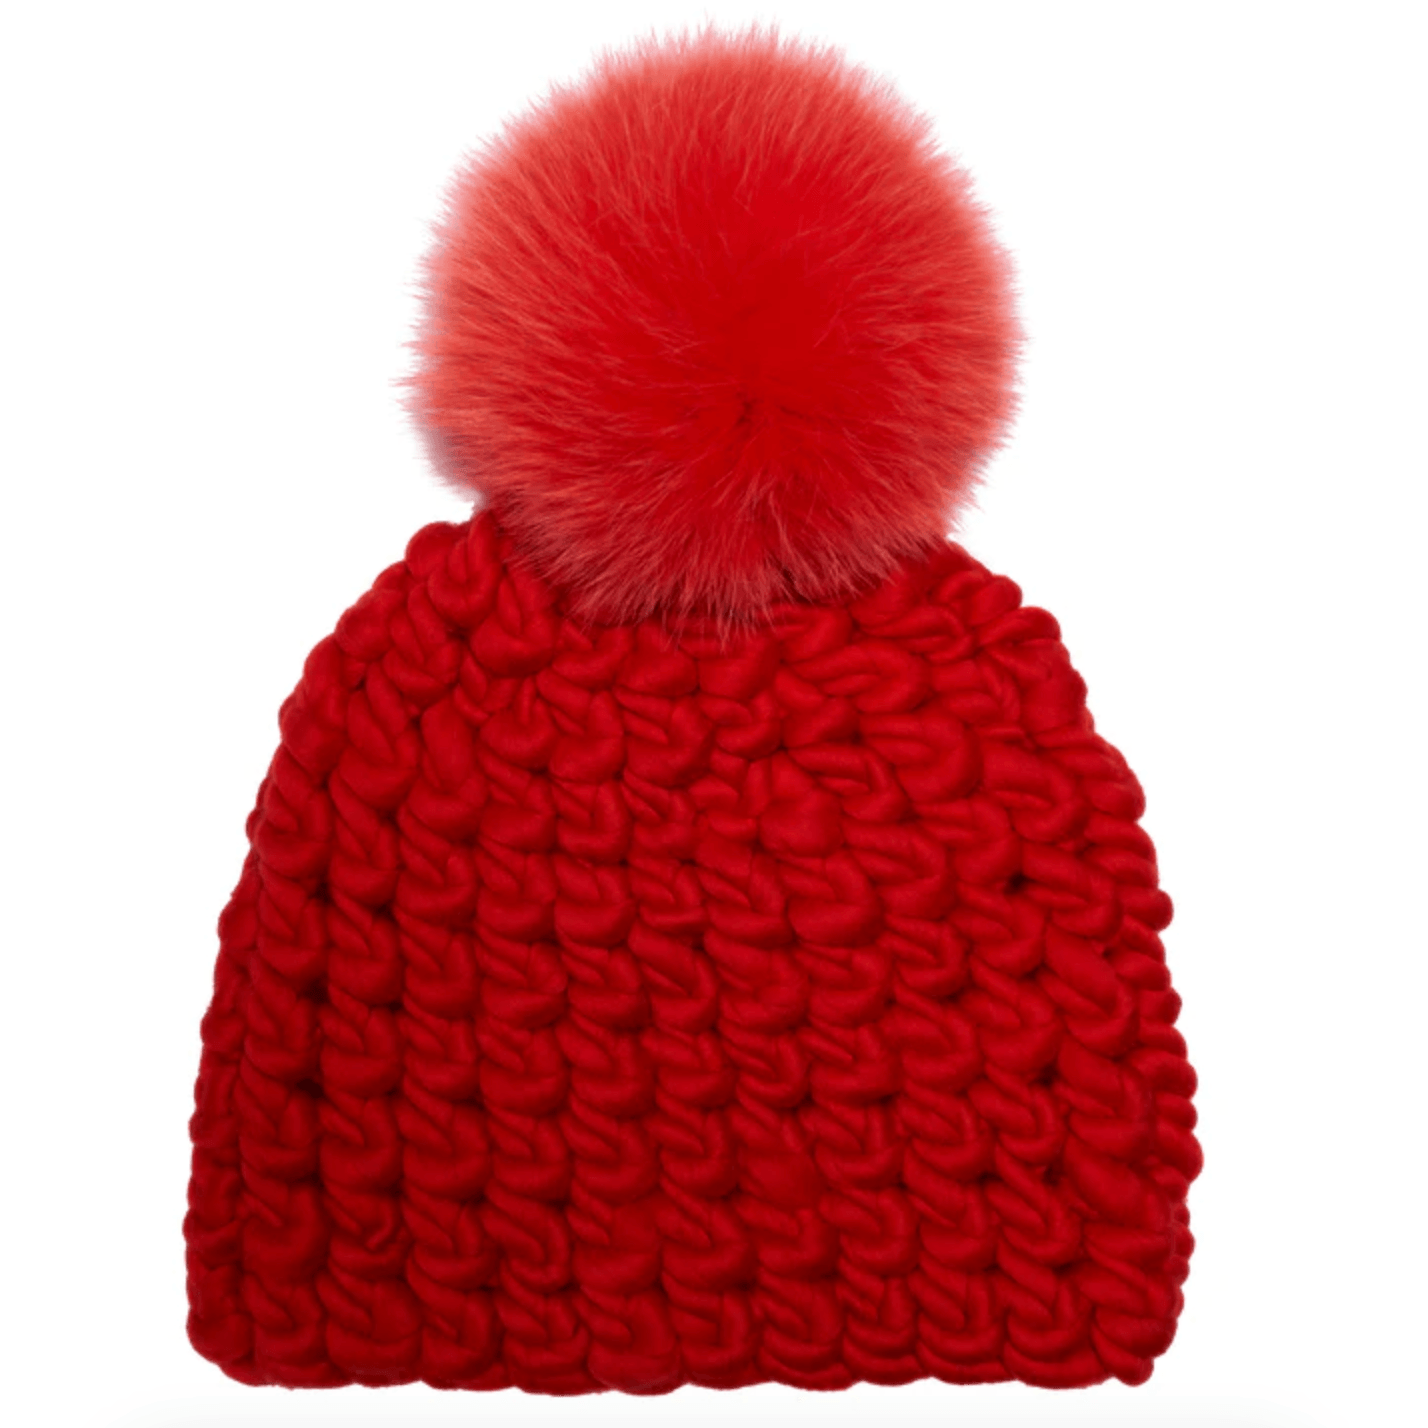 Pomster Beanie in Red Tomato by Mischa Lampert - Haven